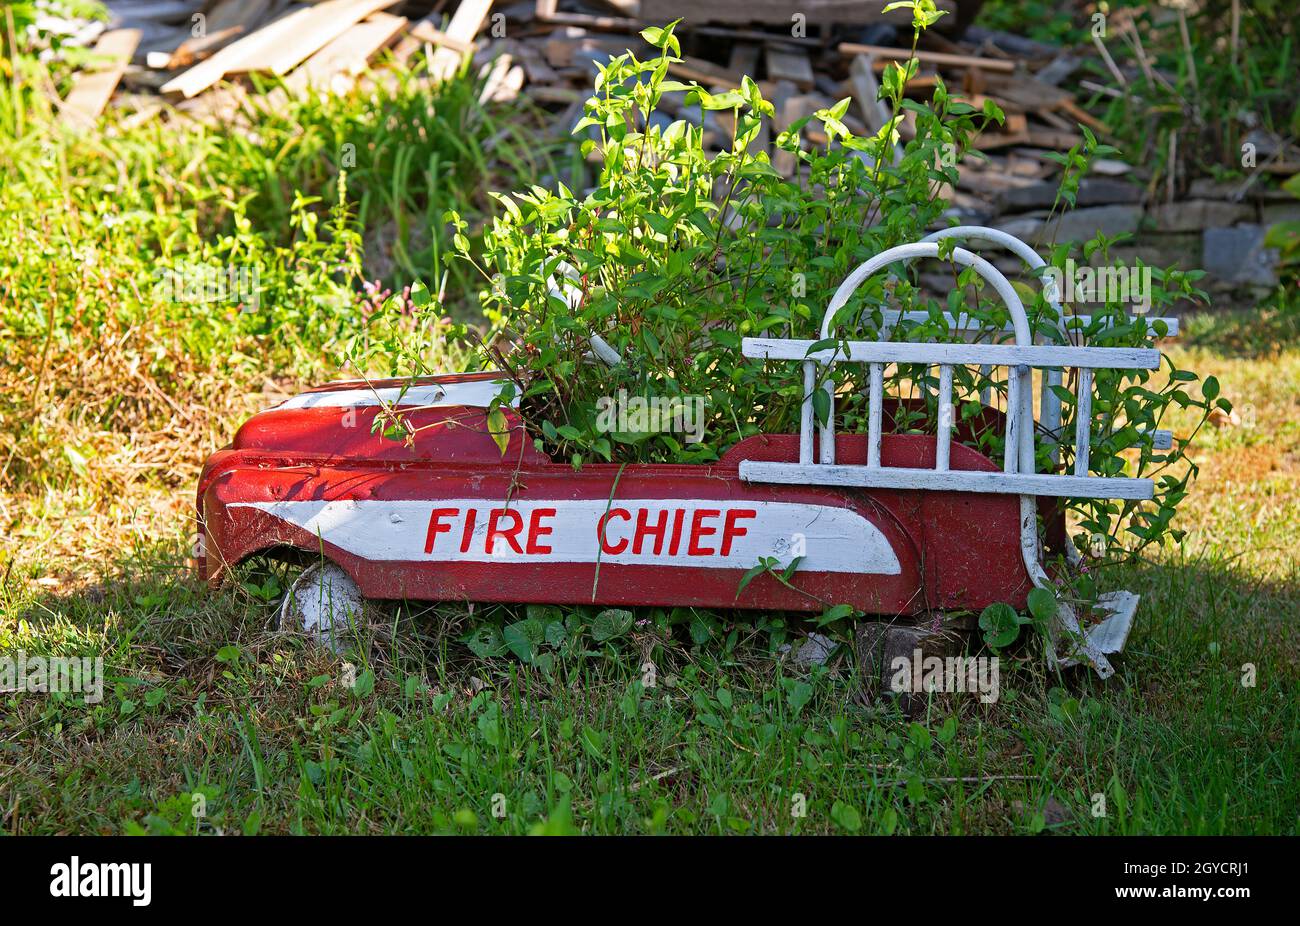 An antique child's toy peddle car, now a planter in Chester, Massachusetts, USA Stock Photo